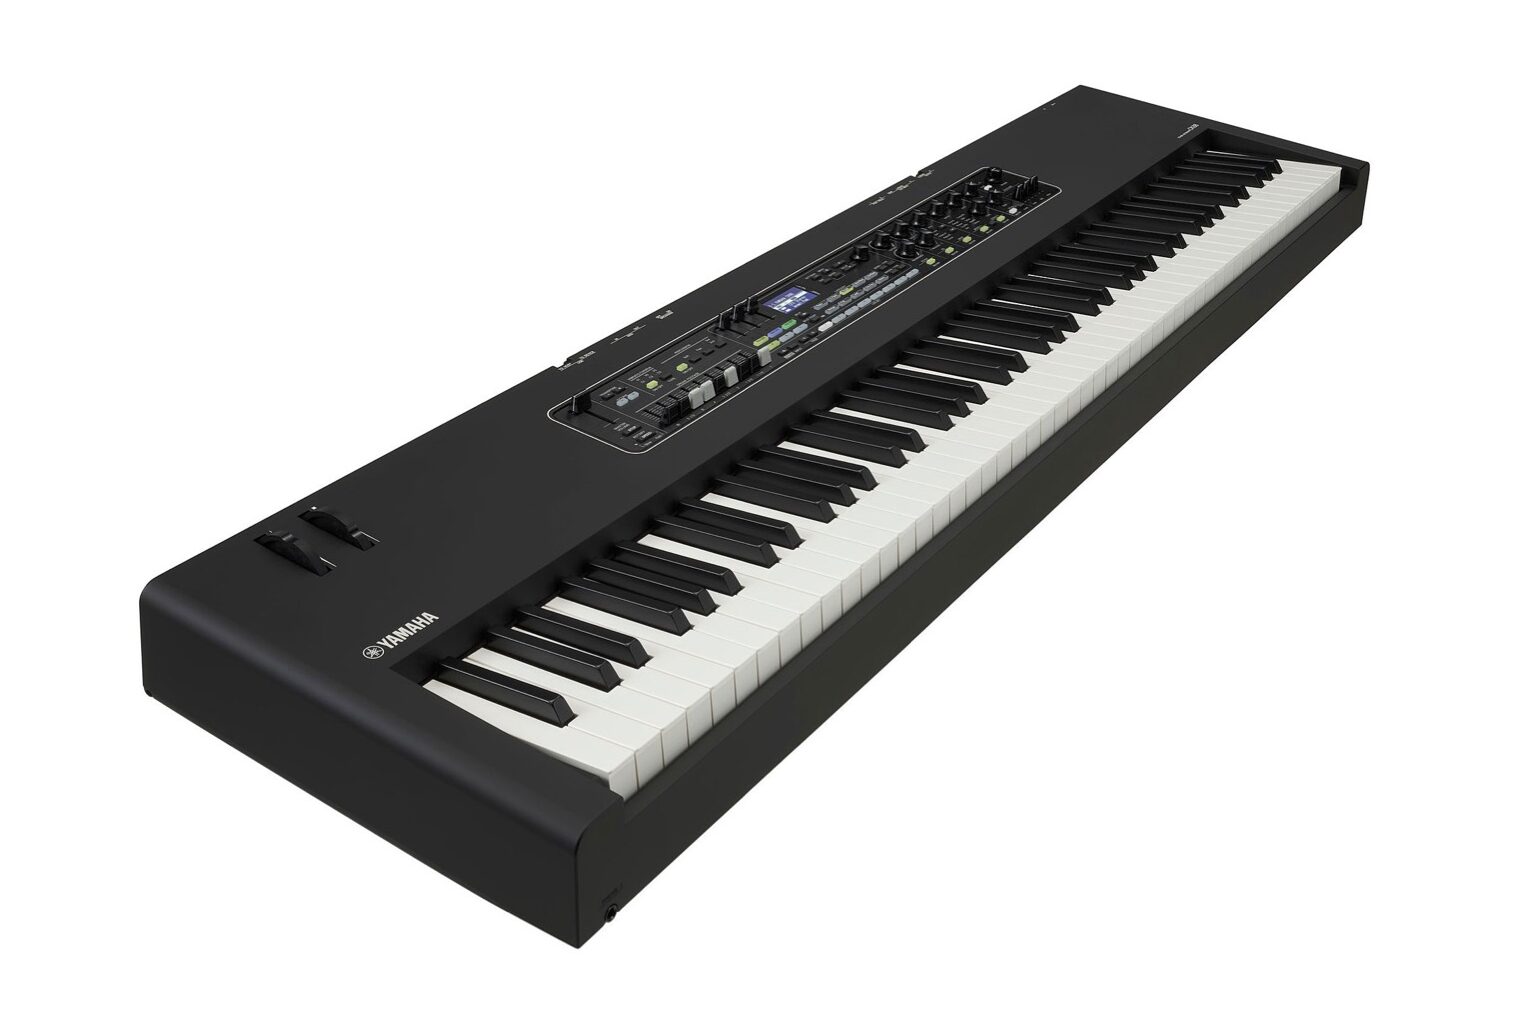 Yamaha CK88 Clavier Synth – Gerald Musique